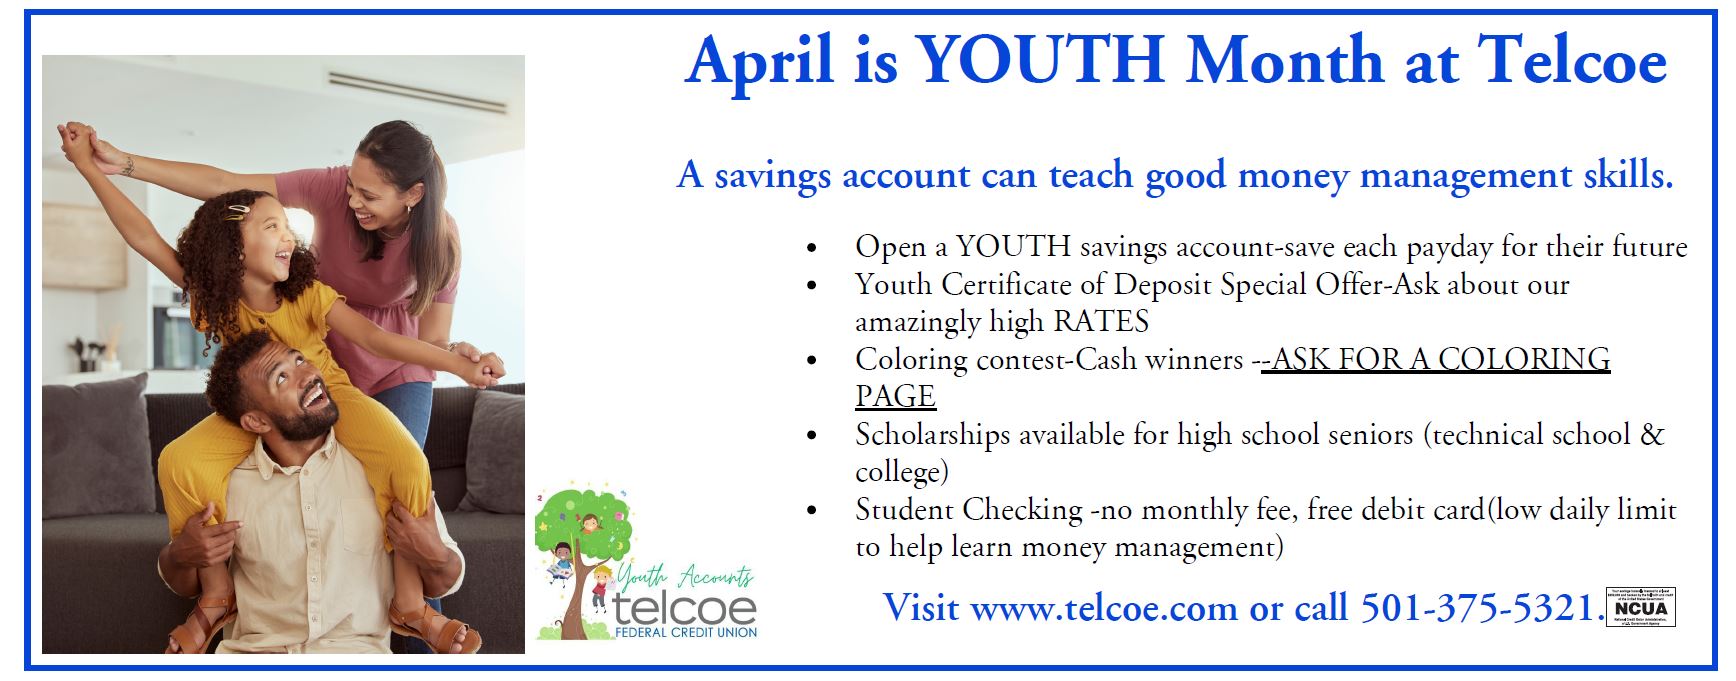 YOUTH MONTH SPECIALS AT TELCOE